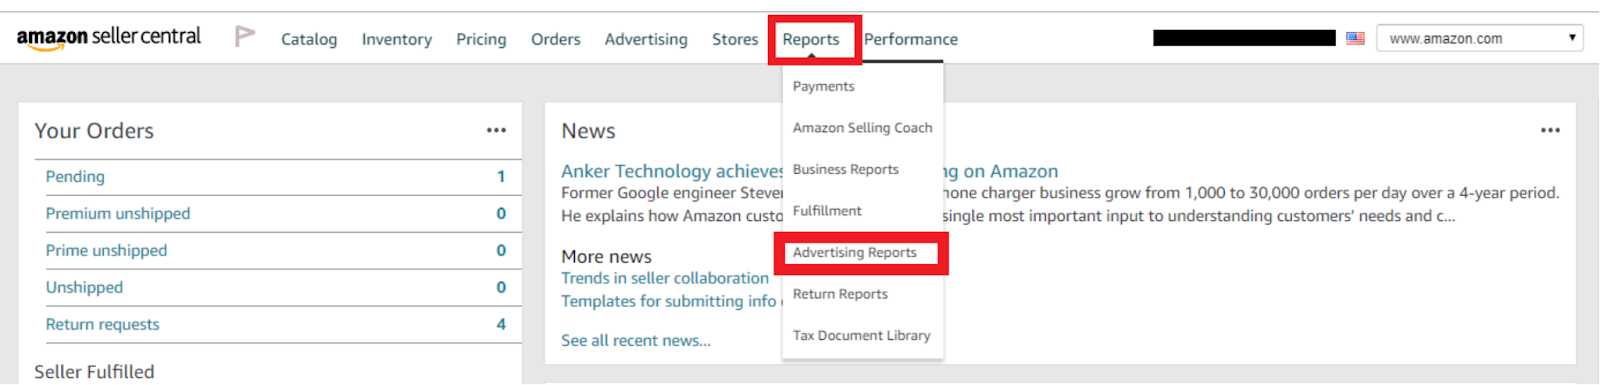 Amazon Ads to Snowflake: advertising reports